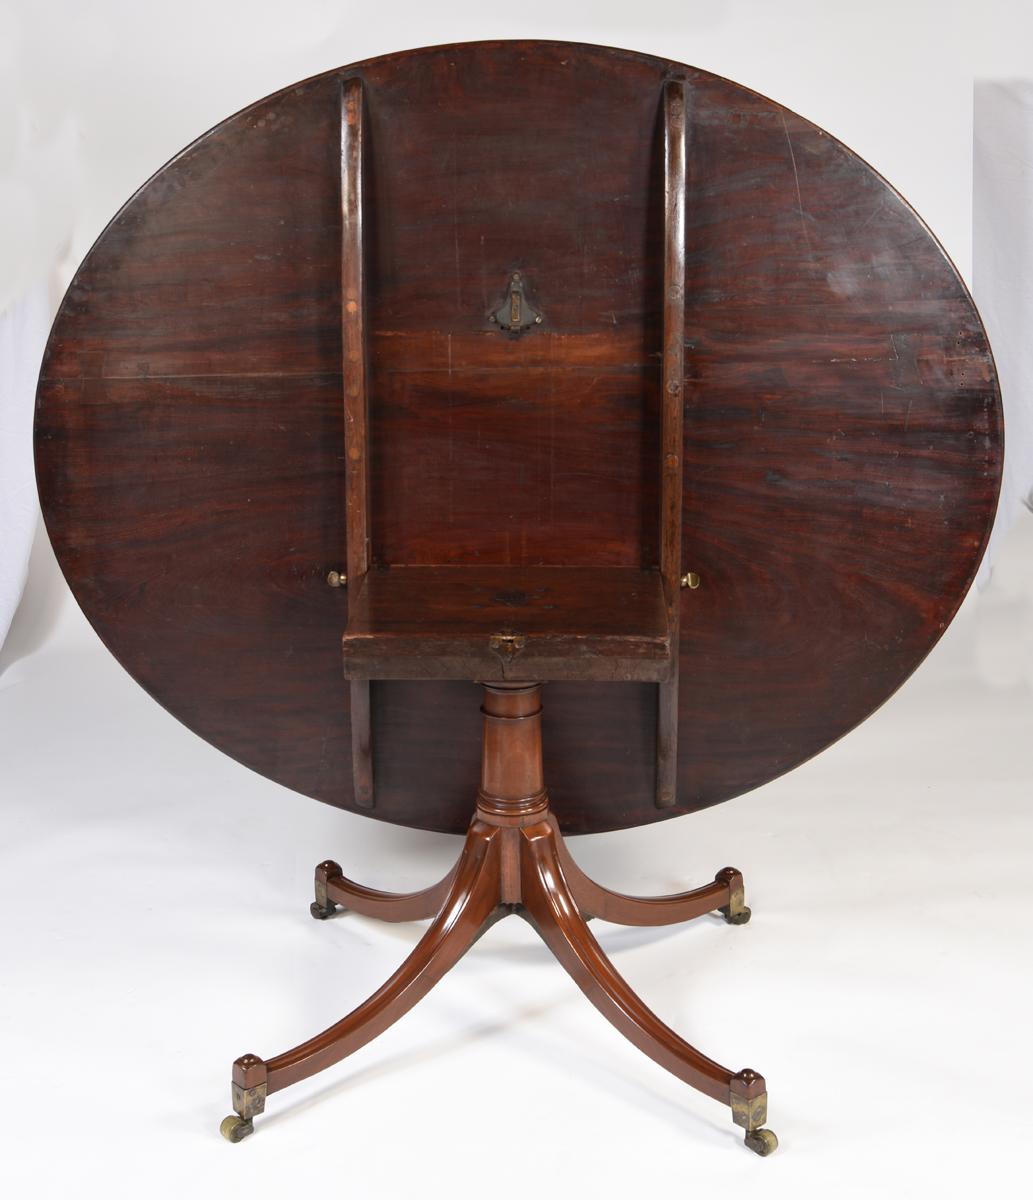 Impressive antique English large oval Cuban mahogany breakfast table on a four splay pedestal base. The tilting top is made from the finest Cuban mahogany with a tulipwood crossbanding. Made and stamped by the well-known company, Gillows of